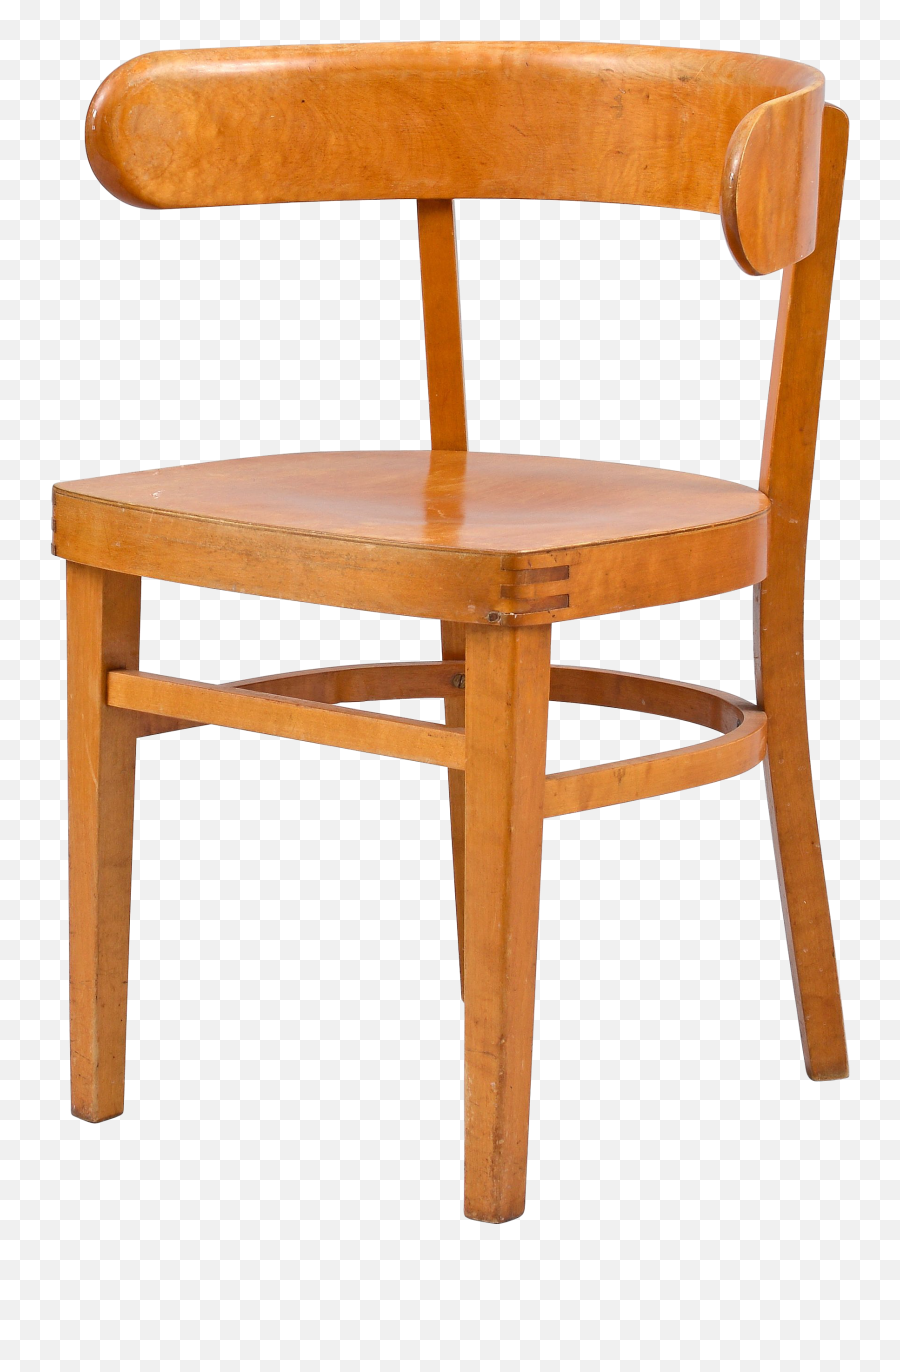 Chair Png Images Free Download - Schauman Stol,Stool Png